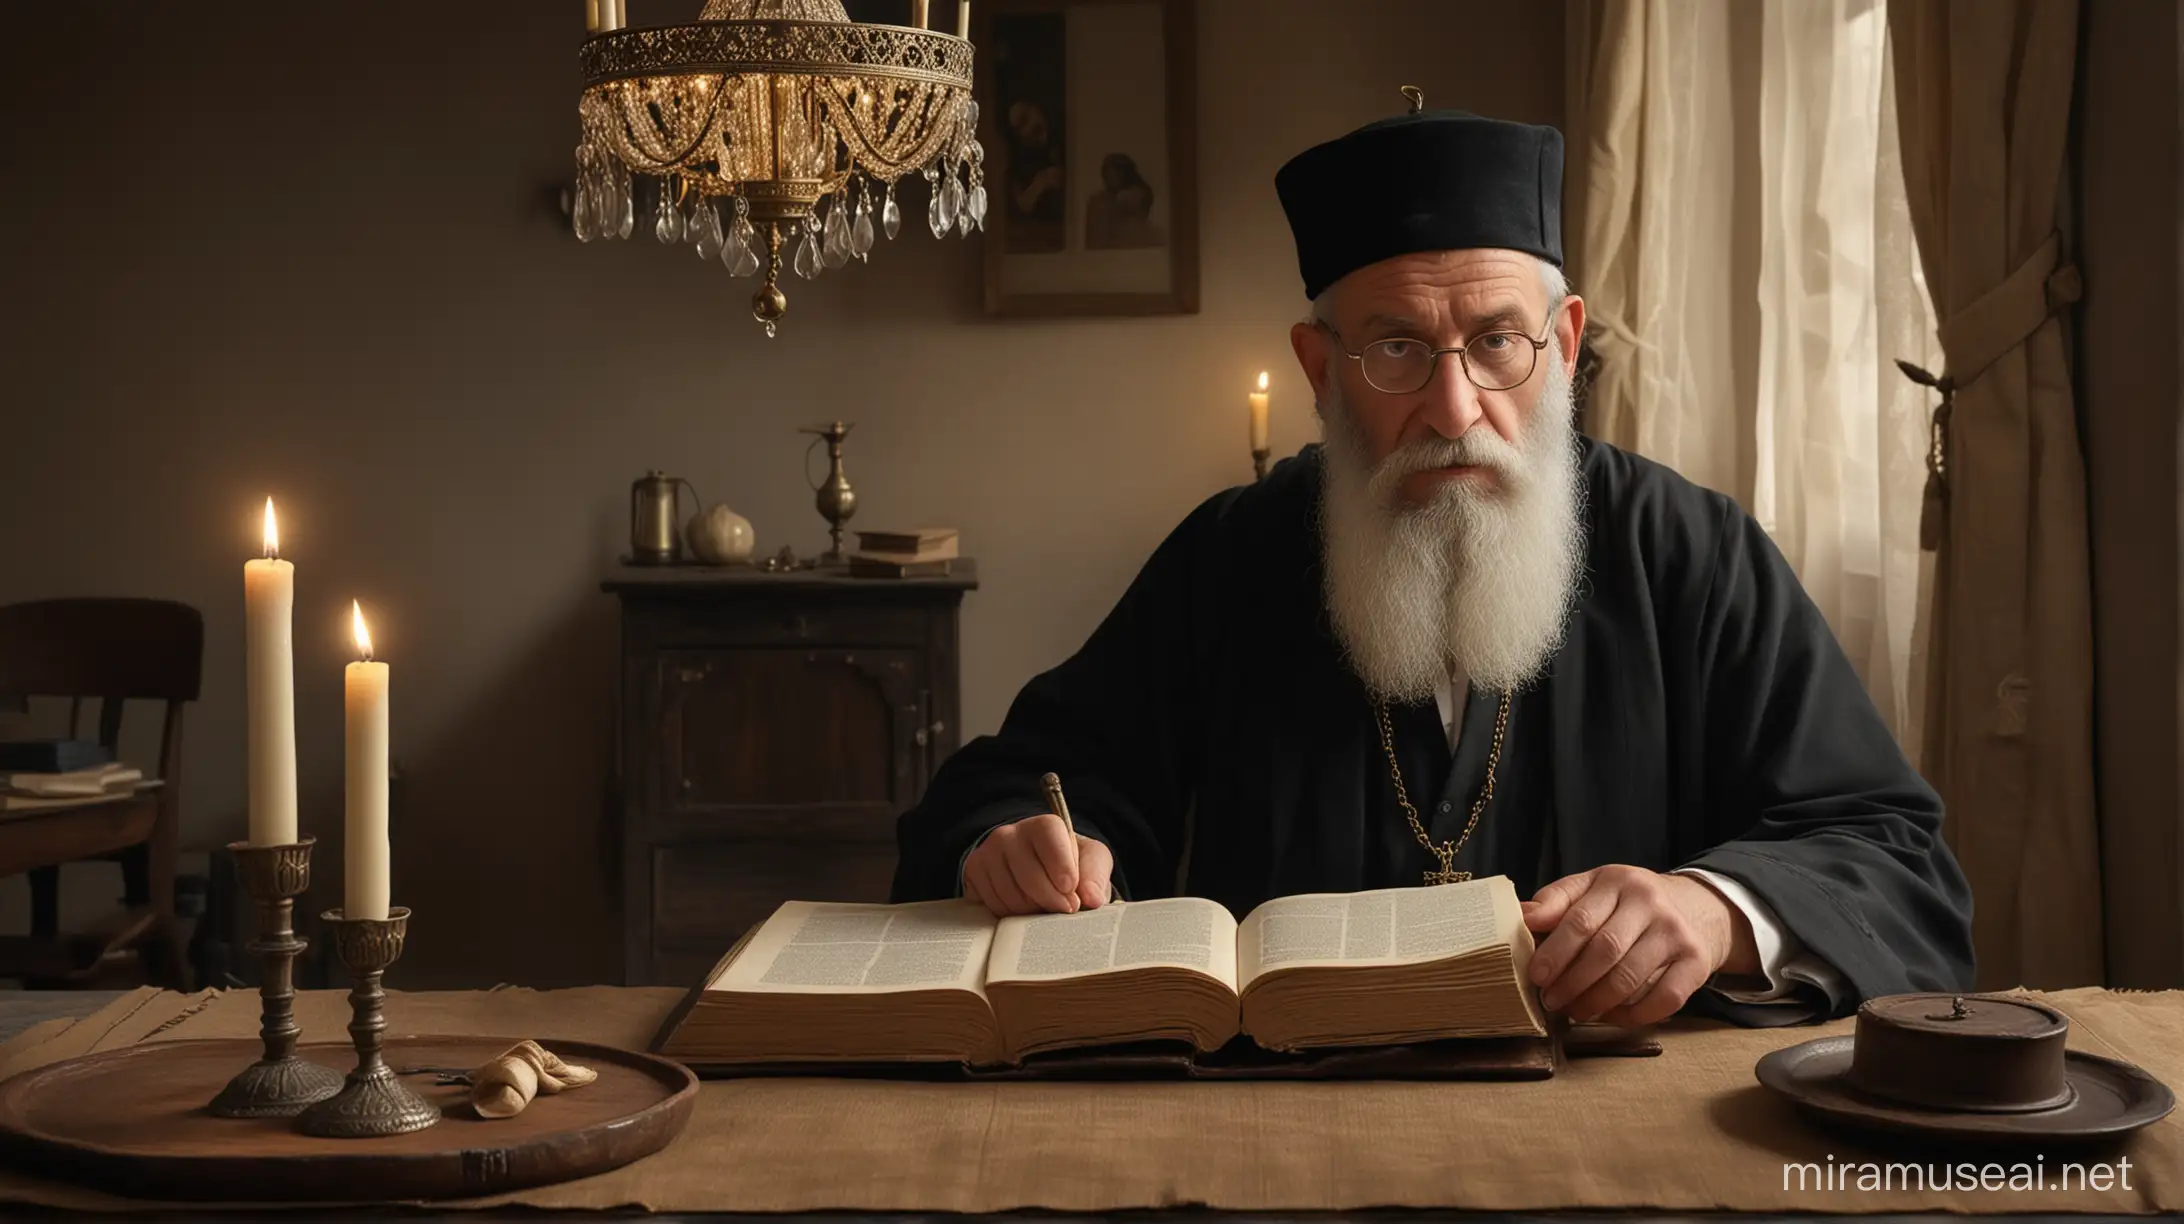 A Jewish rabbi, the Jewish rabbi is an older man without glasses, 12th century, the Jewish rabbi dresses in traditional rabbi clothing and wears a kippah without glasses, Germany, the rabbi is sitting at the table studying a book, a room illuminated with a Jewish chandelier in a dwelling traditional jewish, frontal, hyper-realistic, photo realism, cinematography